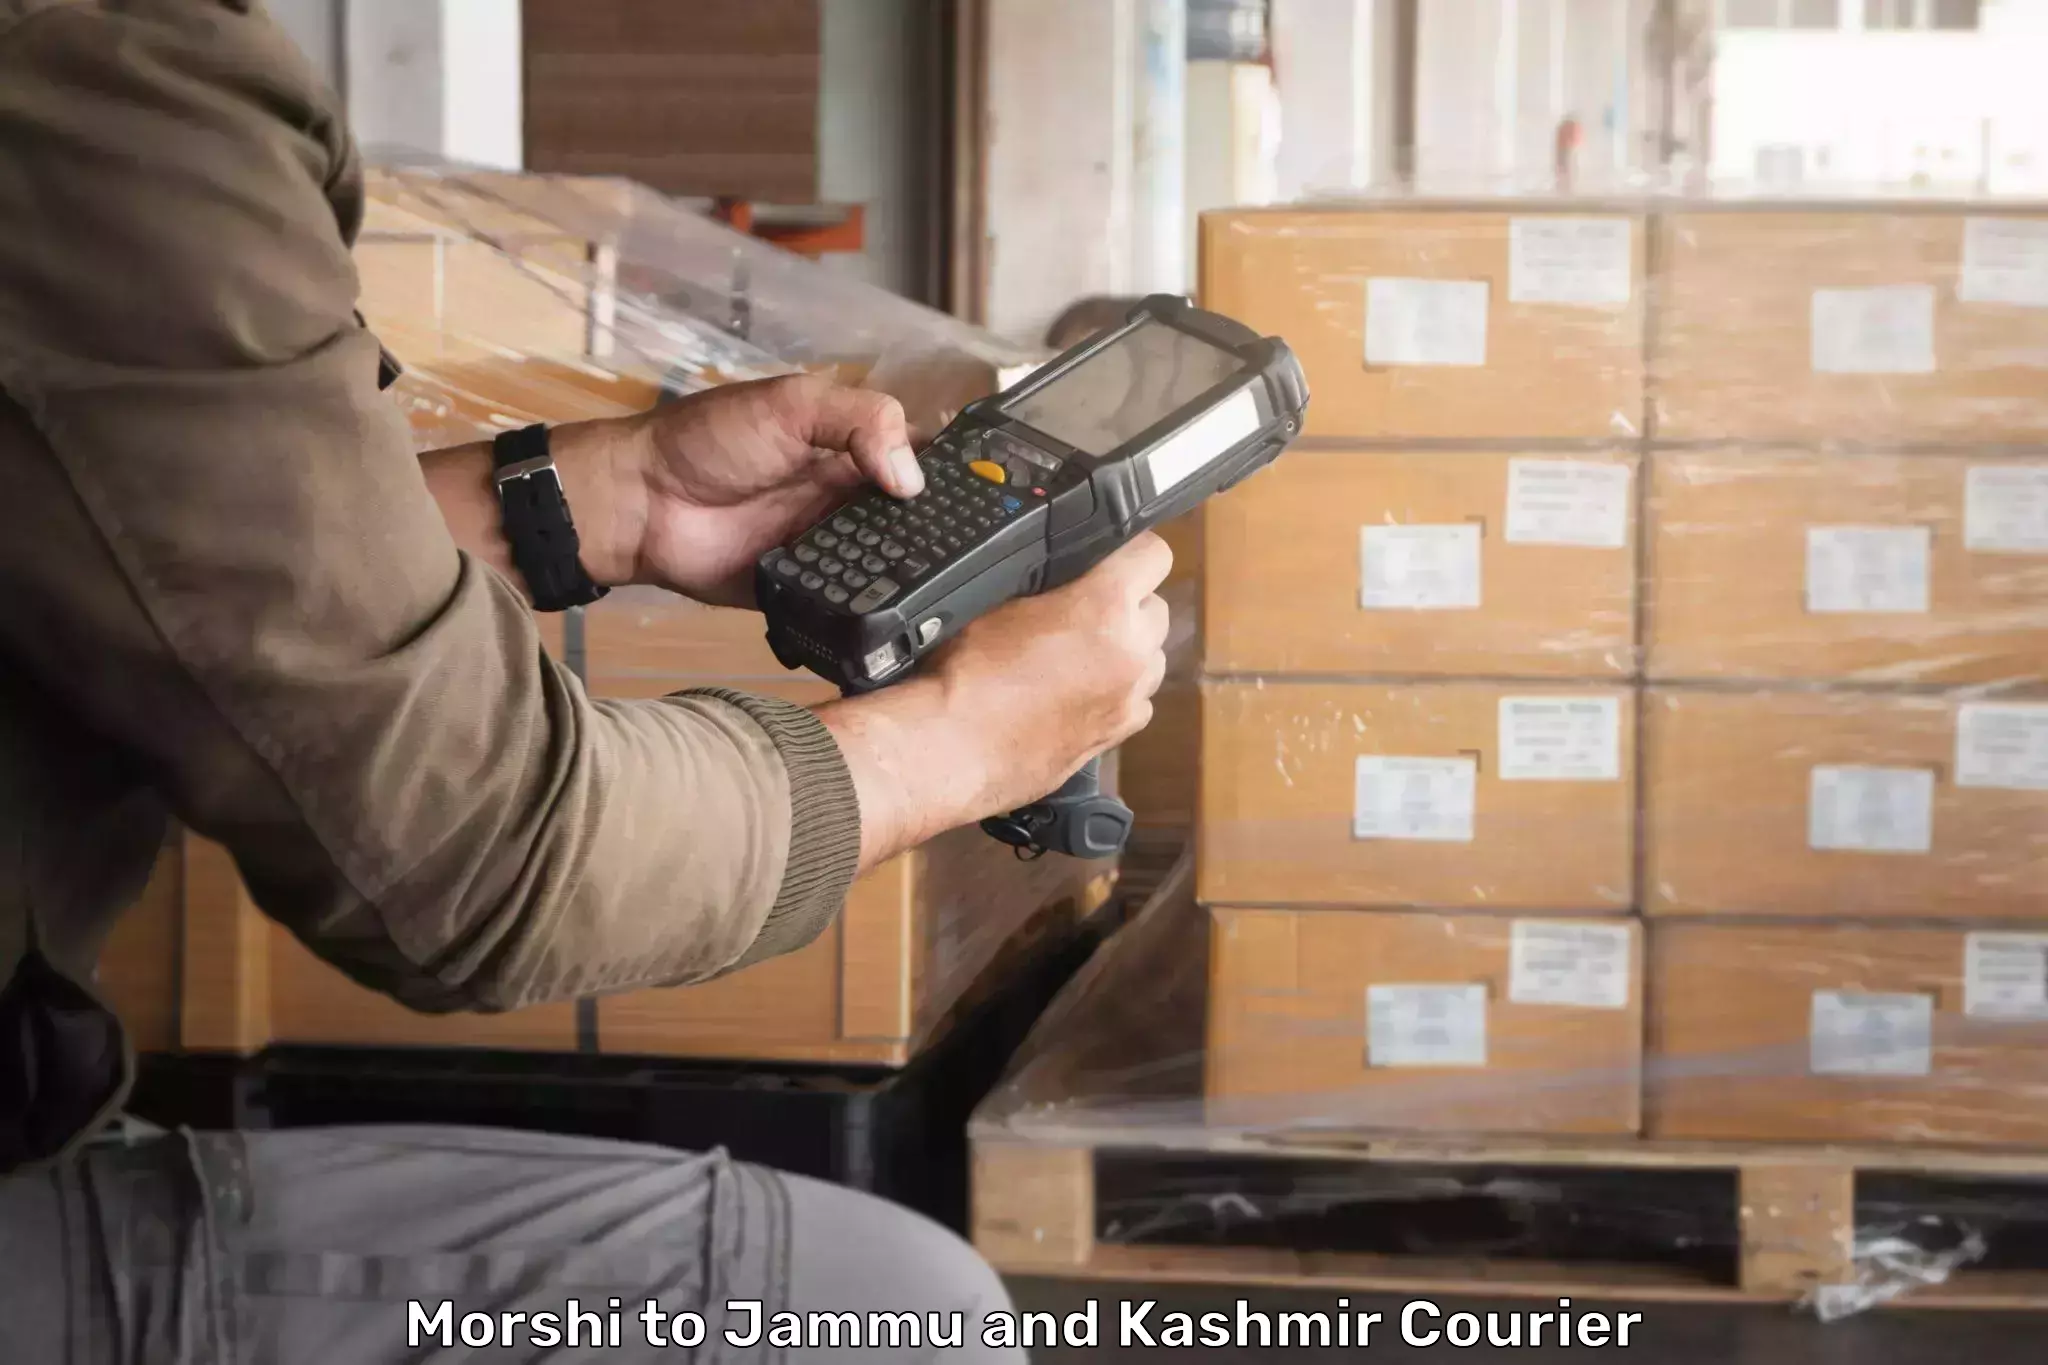 Flexible delivery scheduling in Morshi to Rajouri